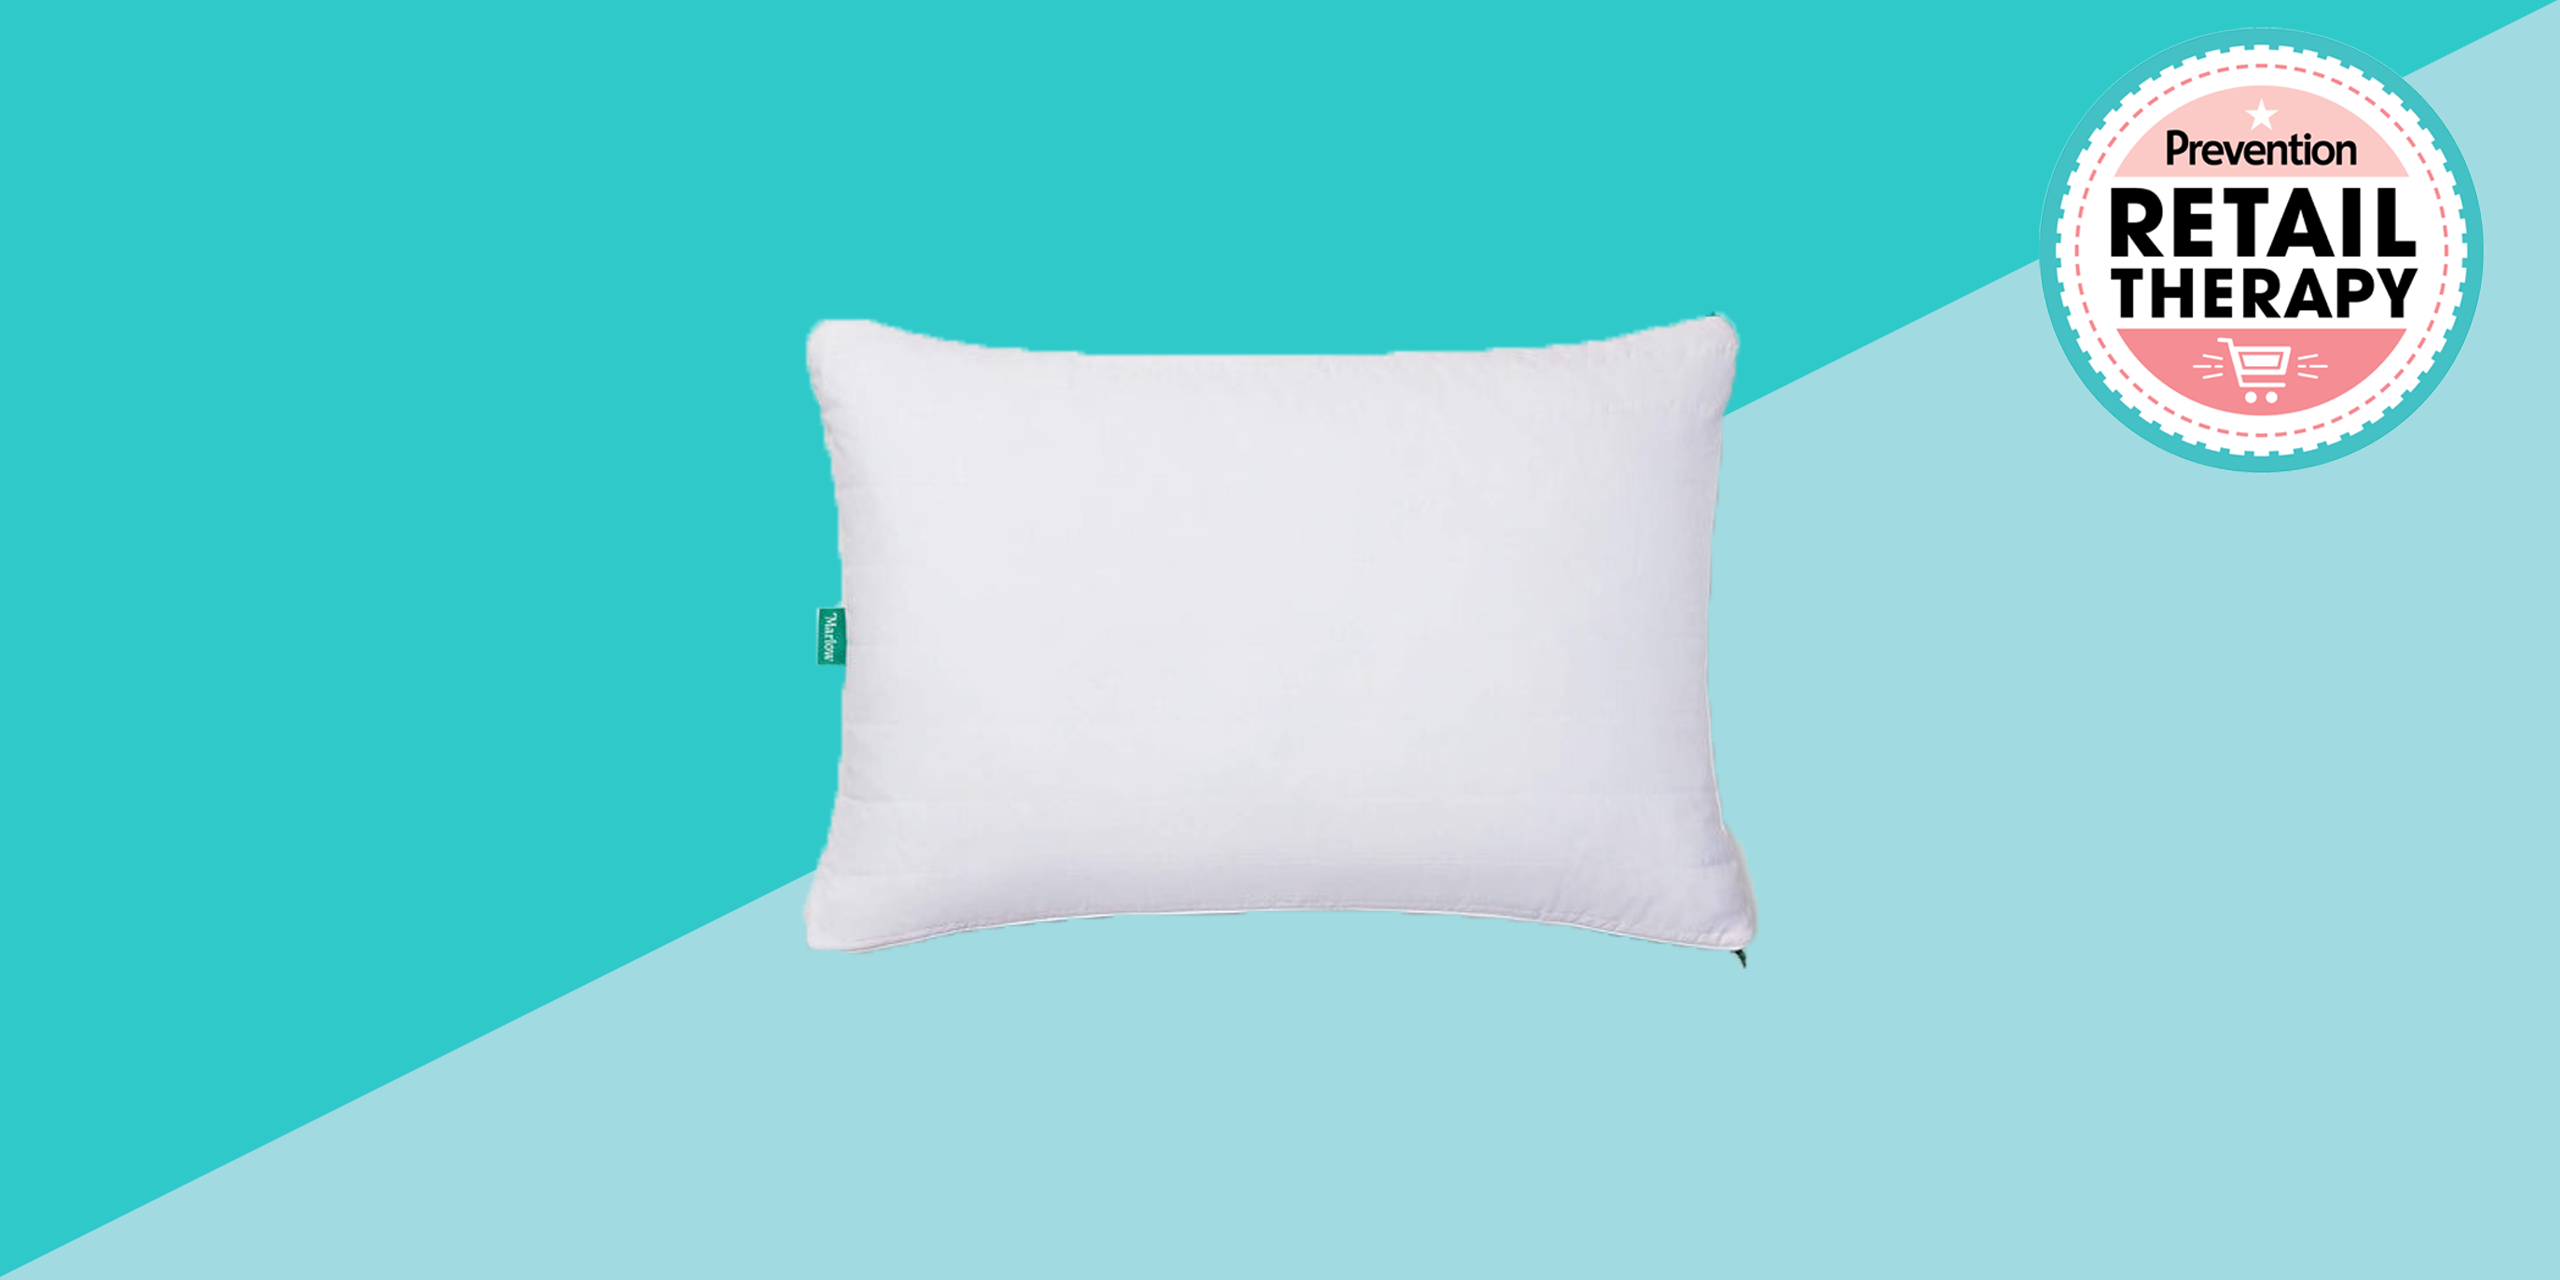 Coop Pillow Review 2023: Why It's the Best Pillow We've Tested